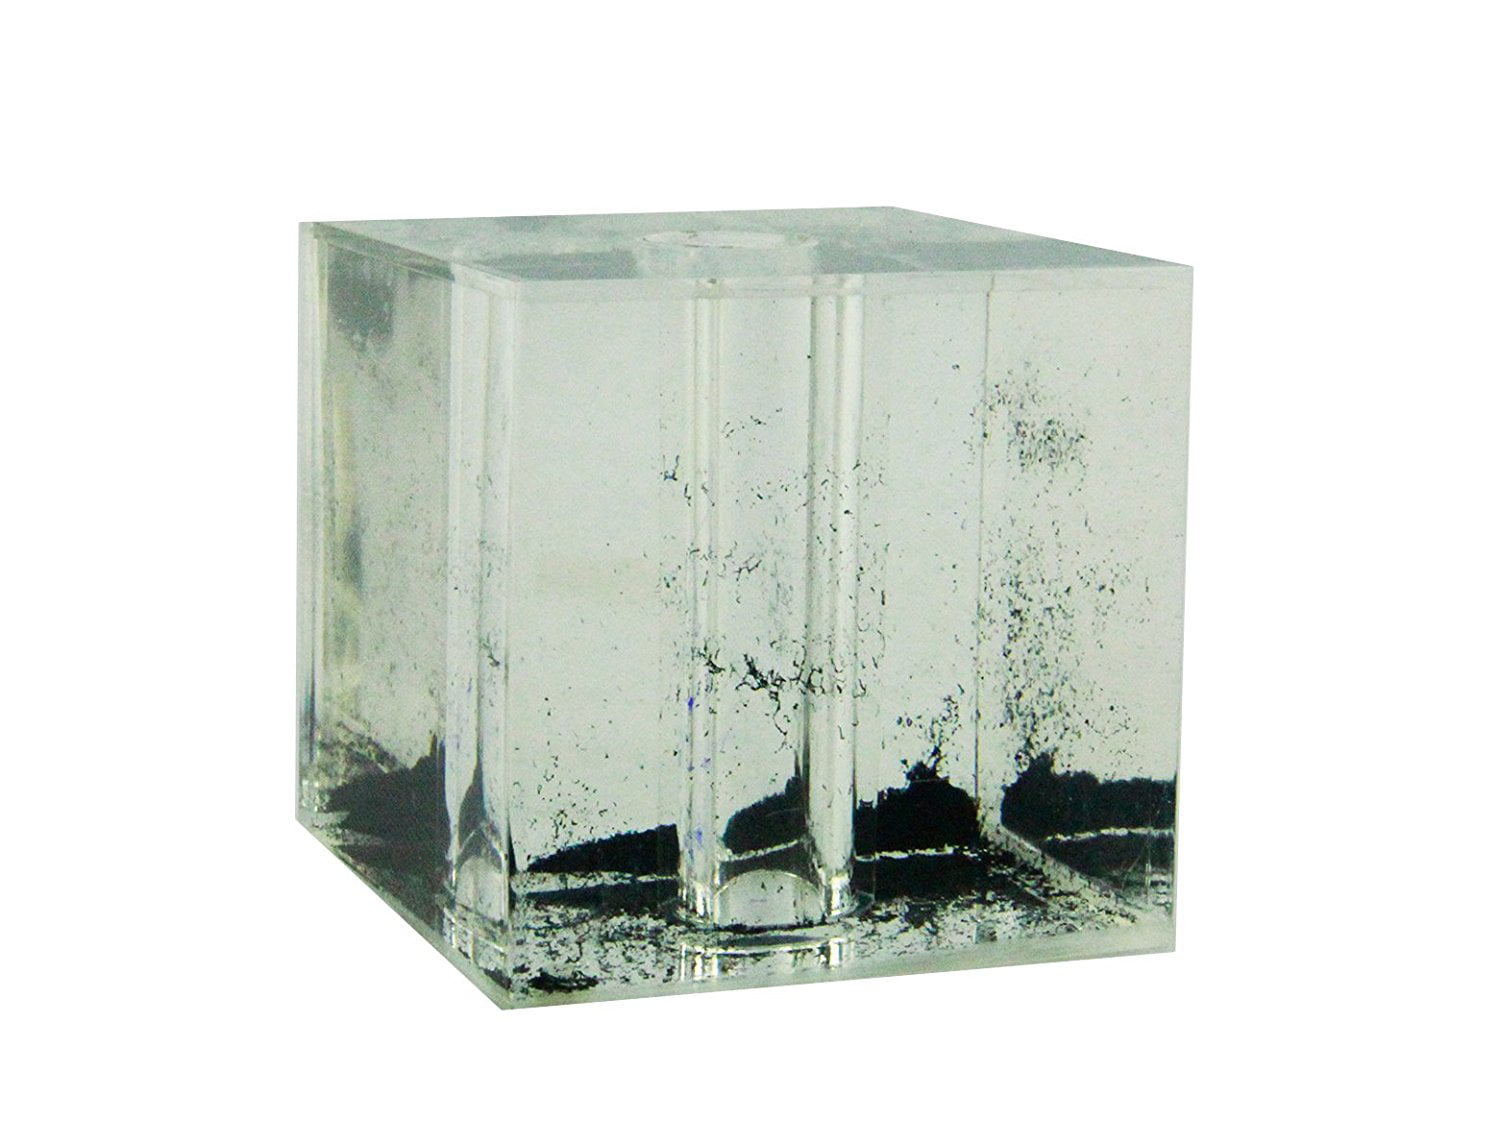 American Scientific Acrylic Cube Magnetic Snow Globe With Iron Filings & Fluid for sale online